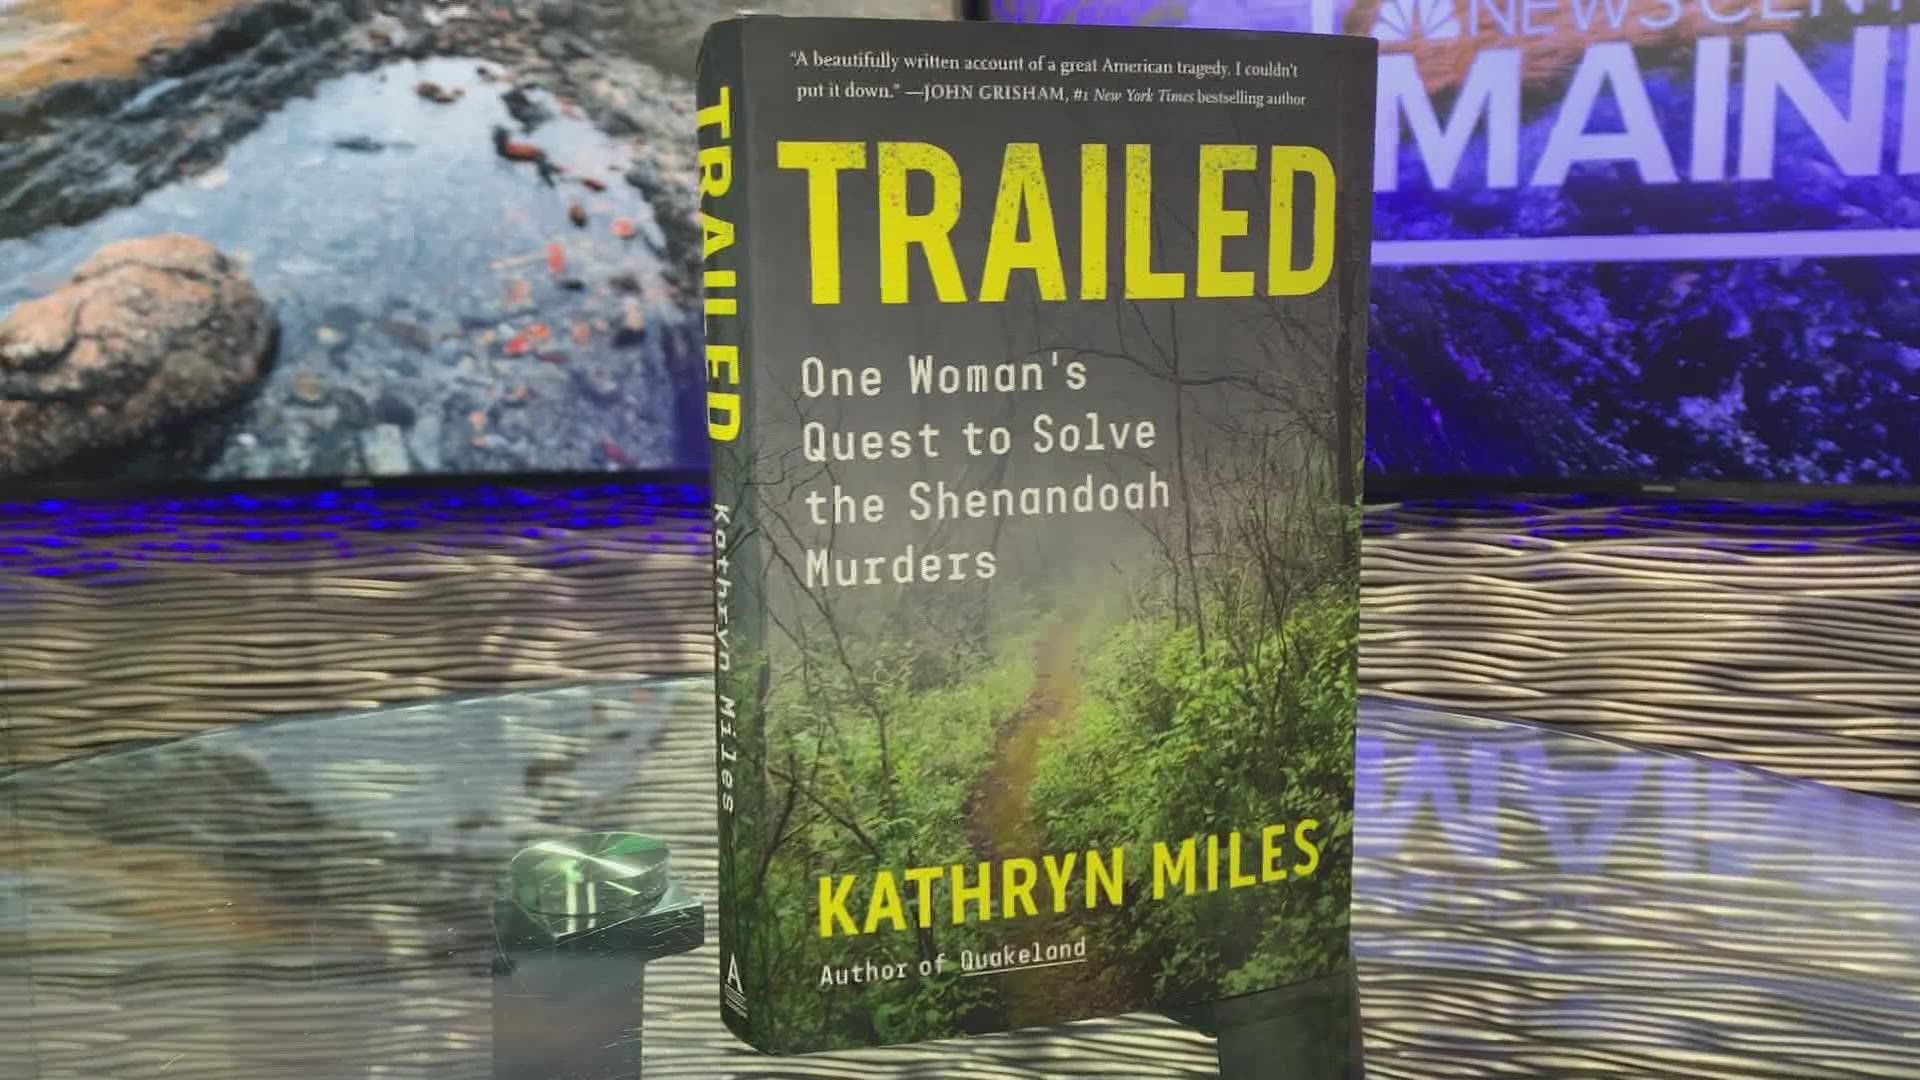 Author and journalist, Kathryn Miles dives into what happened to Lollie Winans and Julie Williams in her new book which takes a greater look at the cold case.